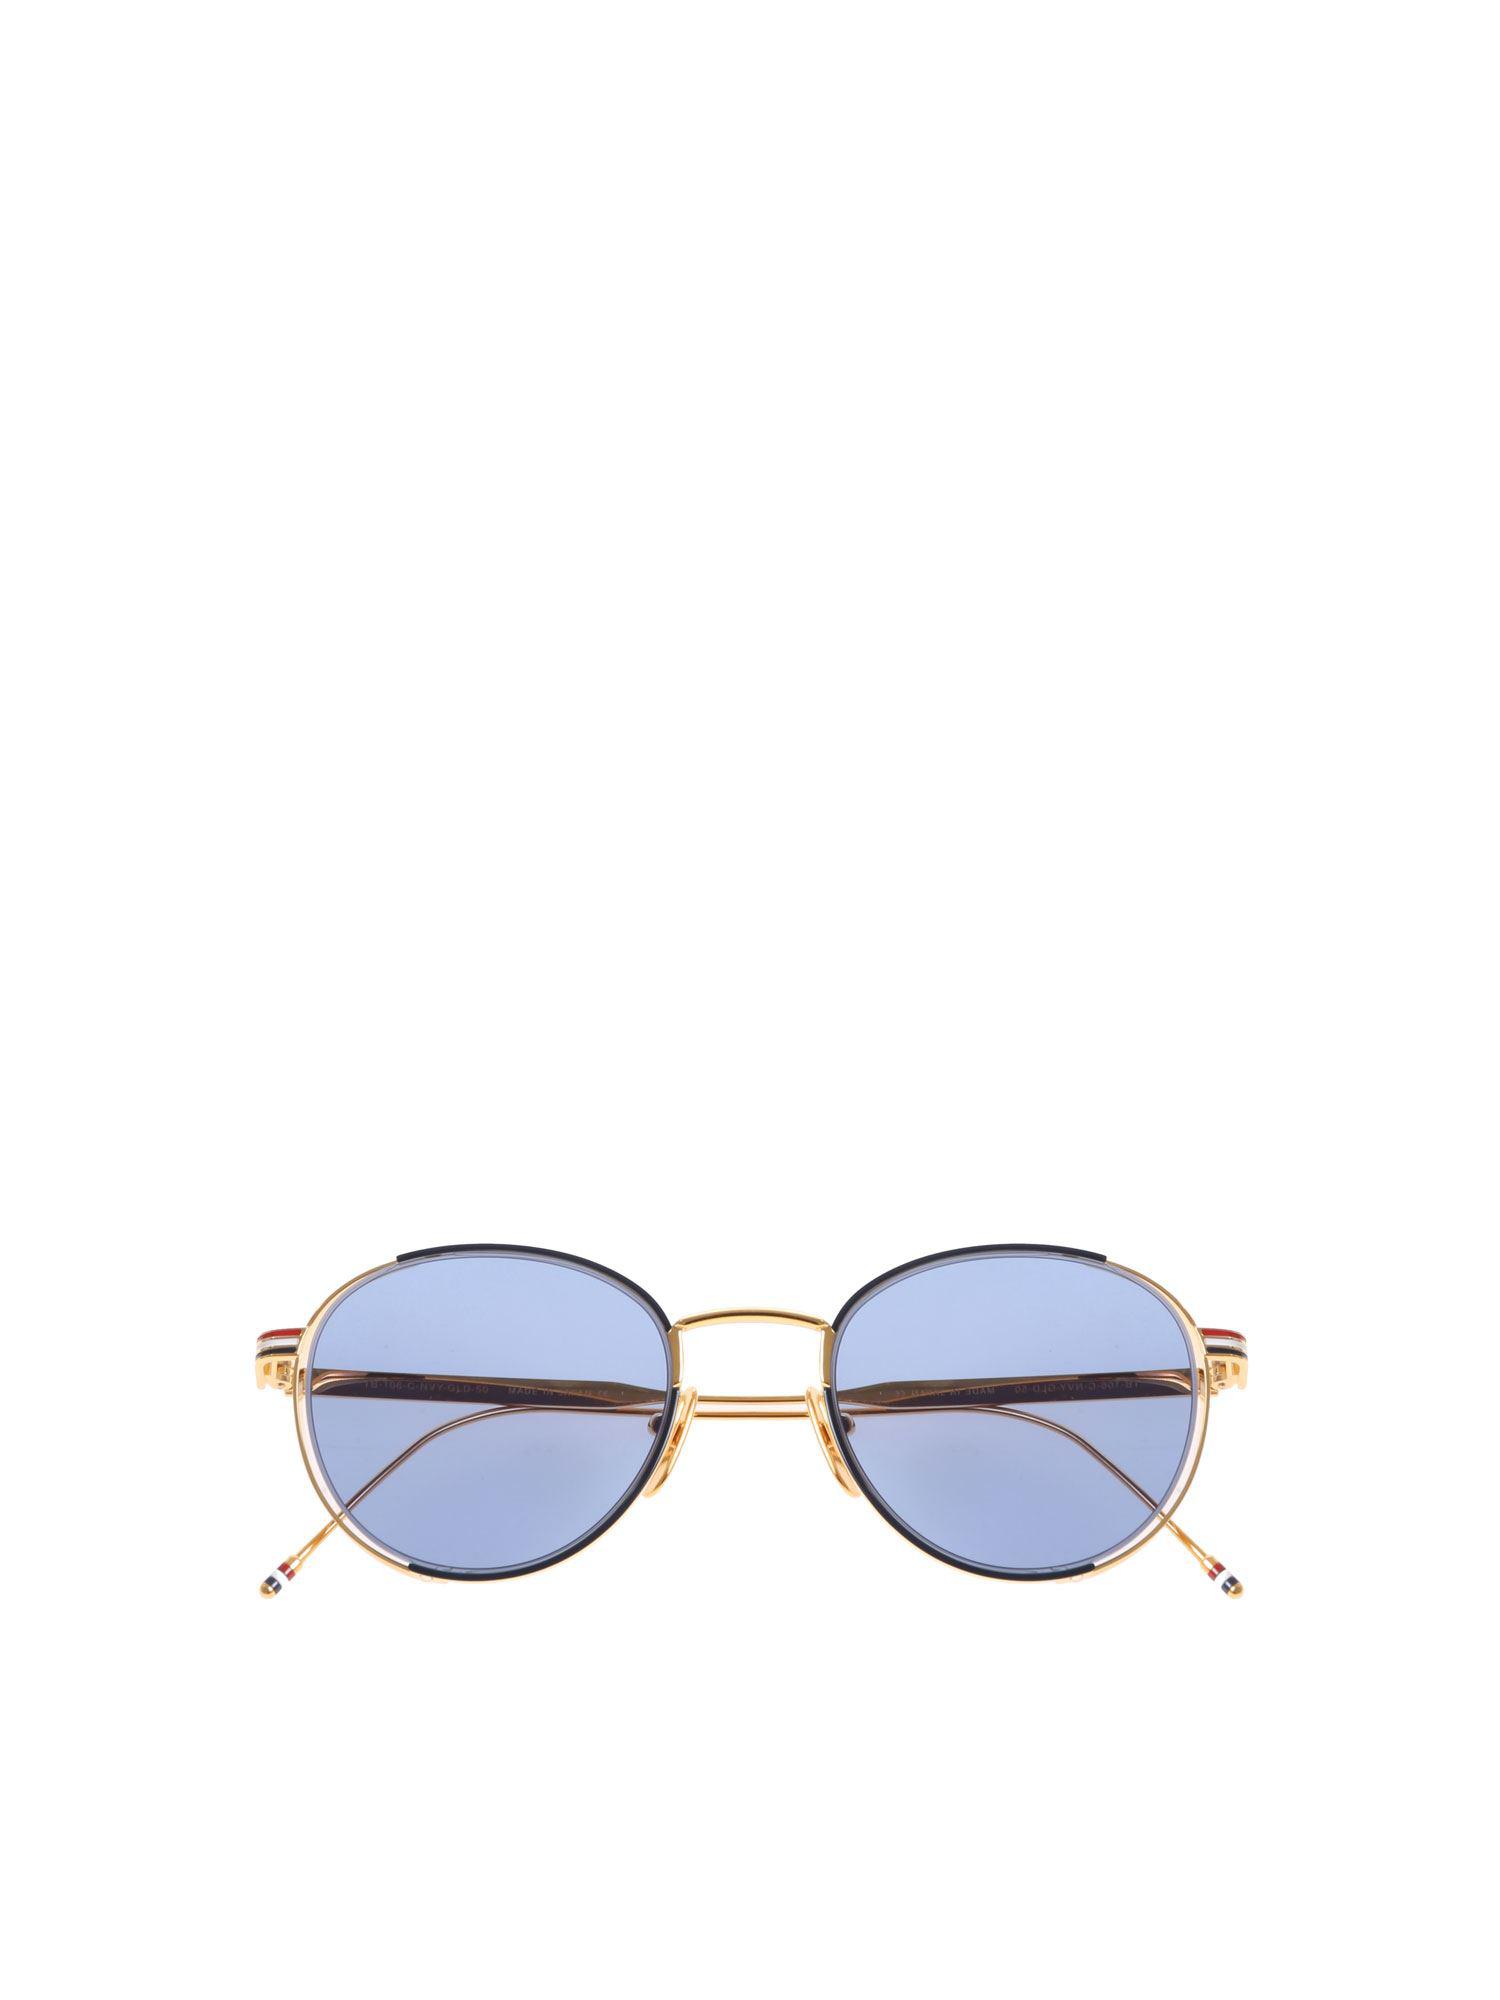 Thom Browne Golden Sunglasses With Blue Lens - Lyst